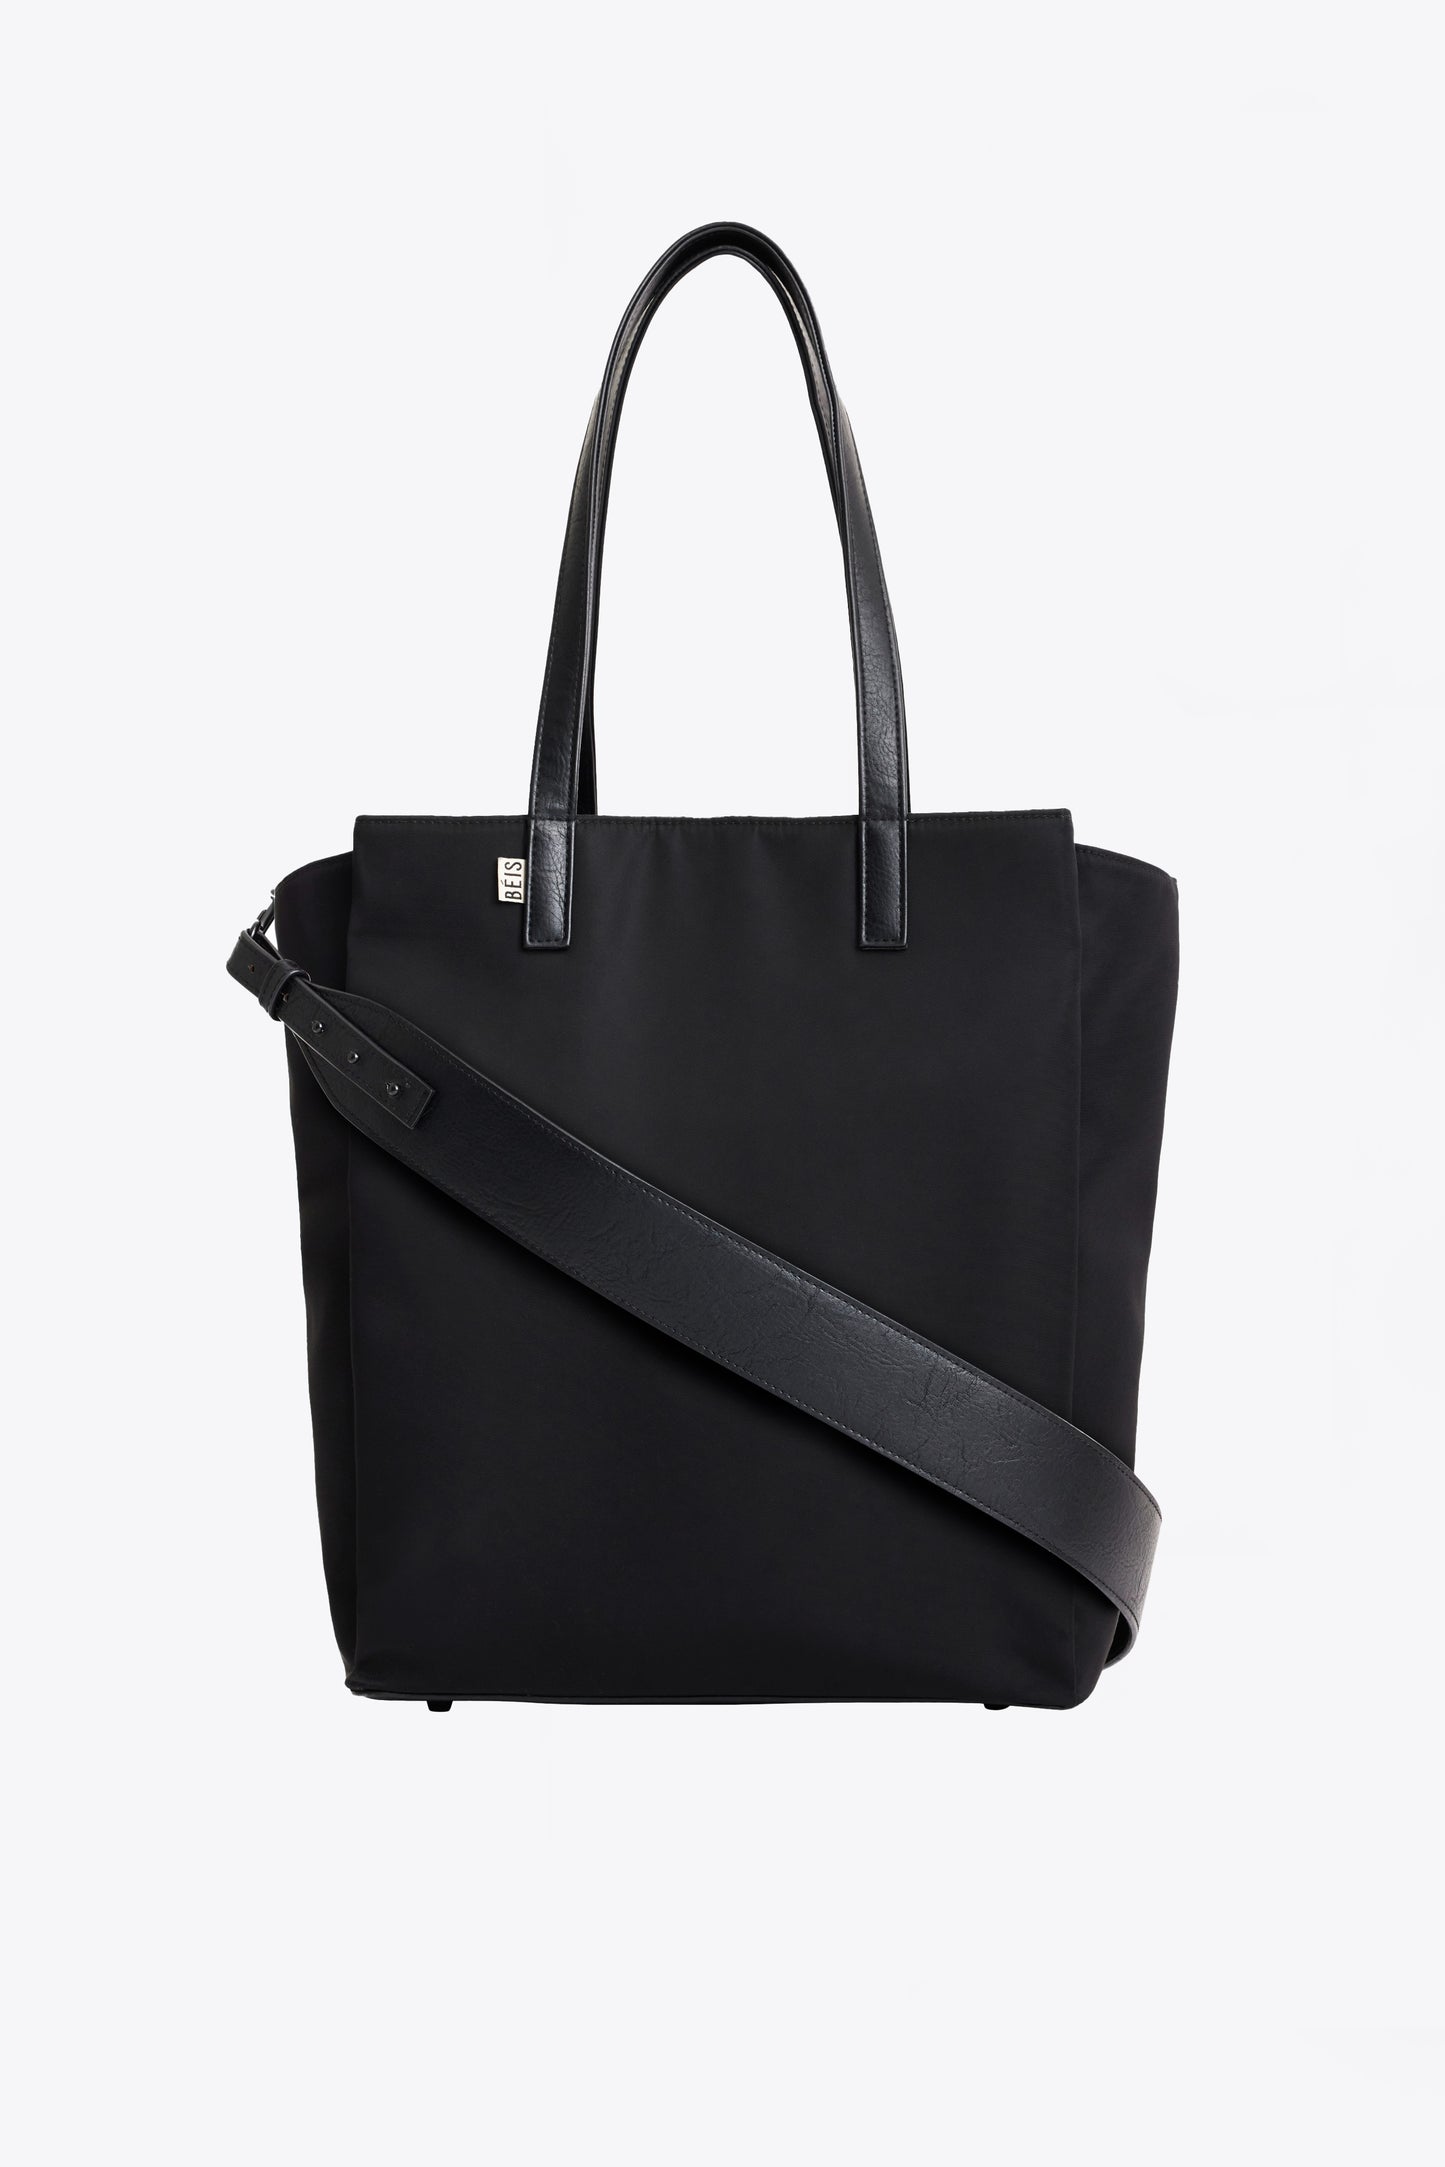 The Commuter Tote In Black